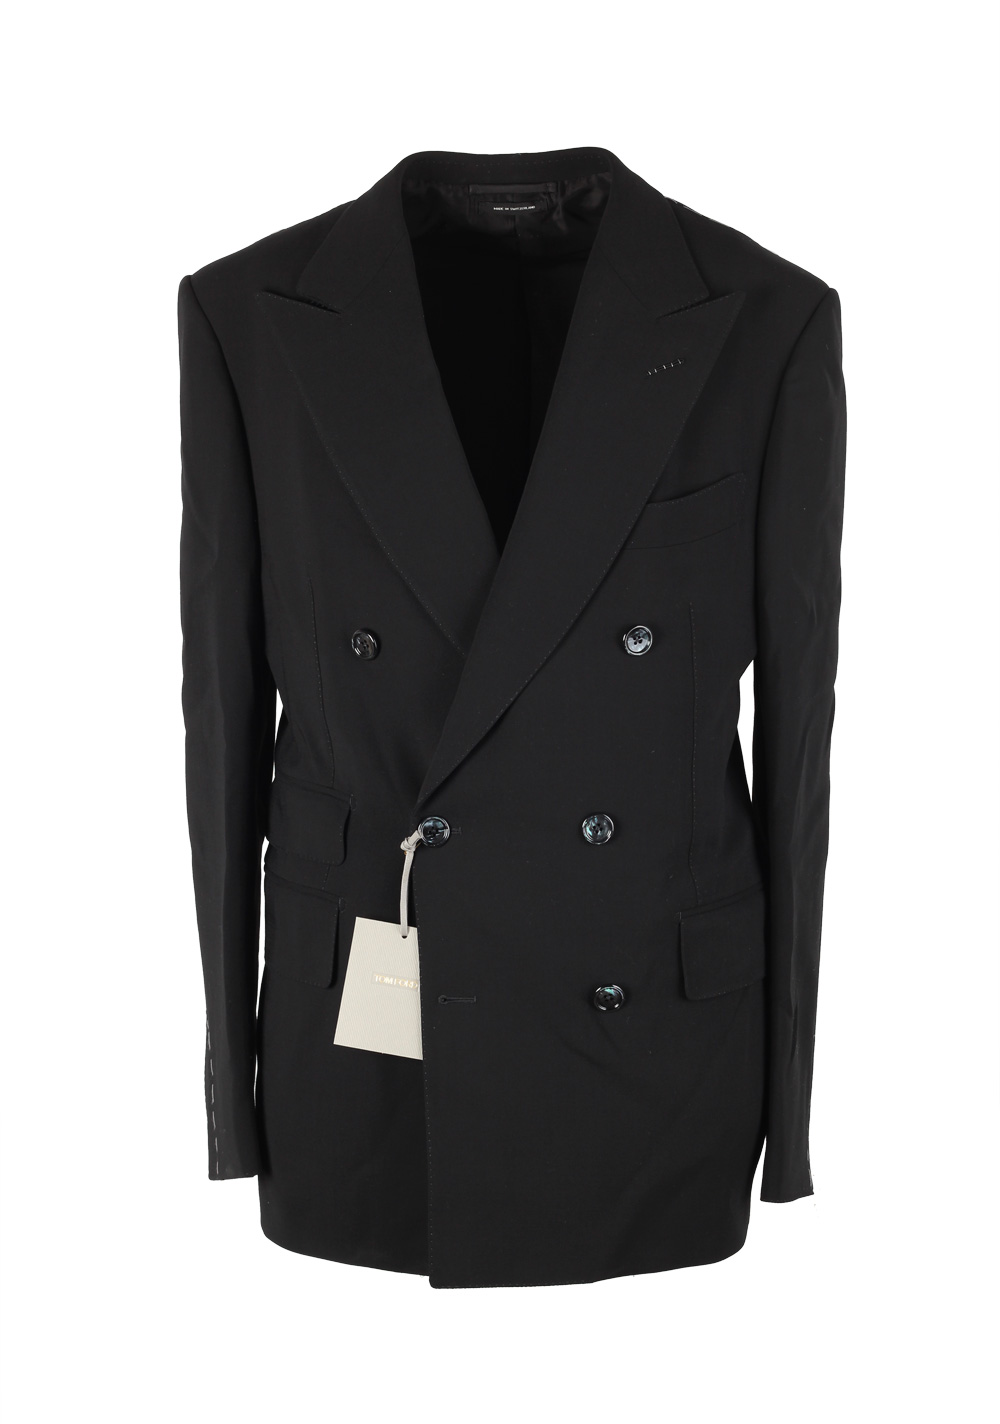 TOM FORD Shelton Double Breasted Solid Black Suit Size 46 / 36R U.S. | Costume Limité